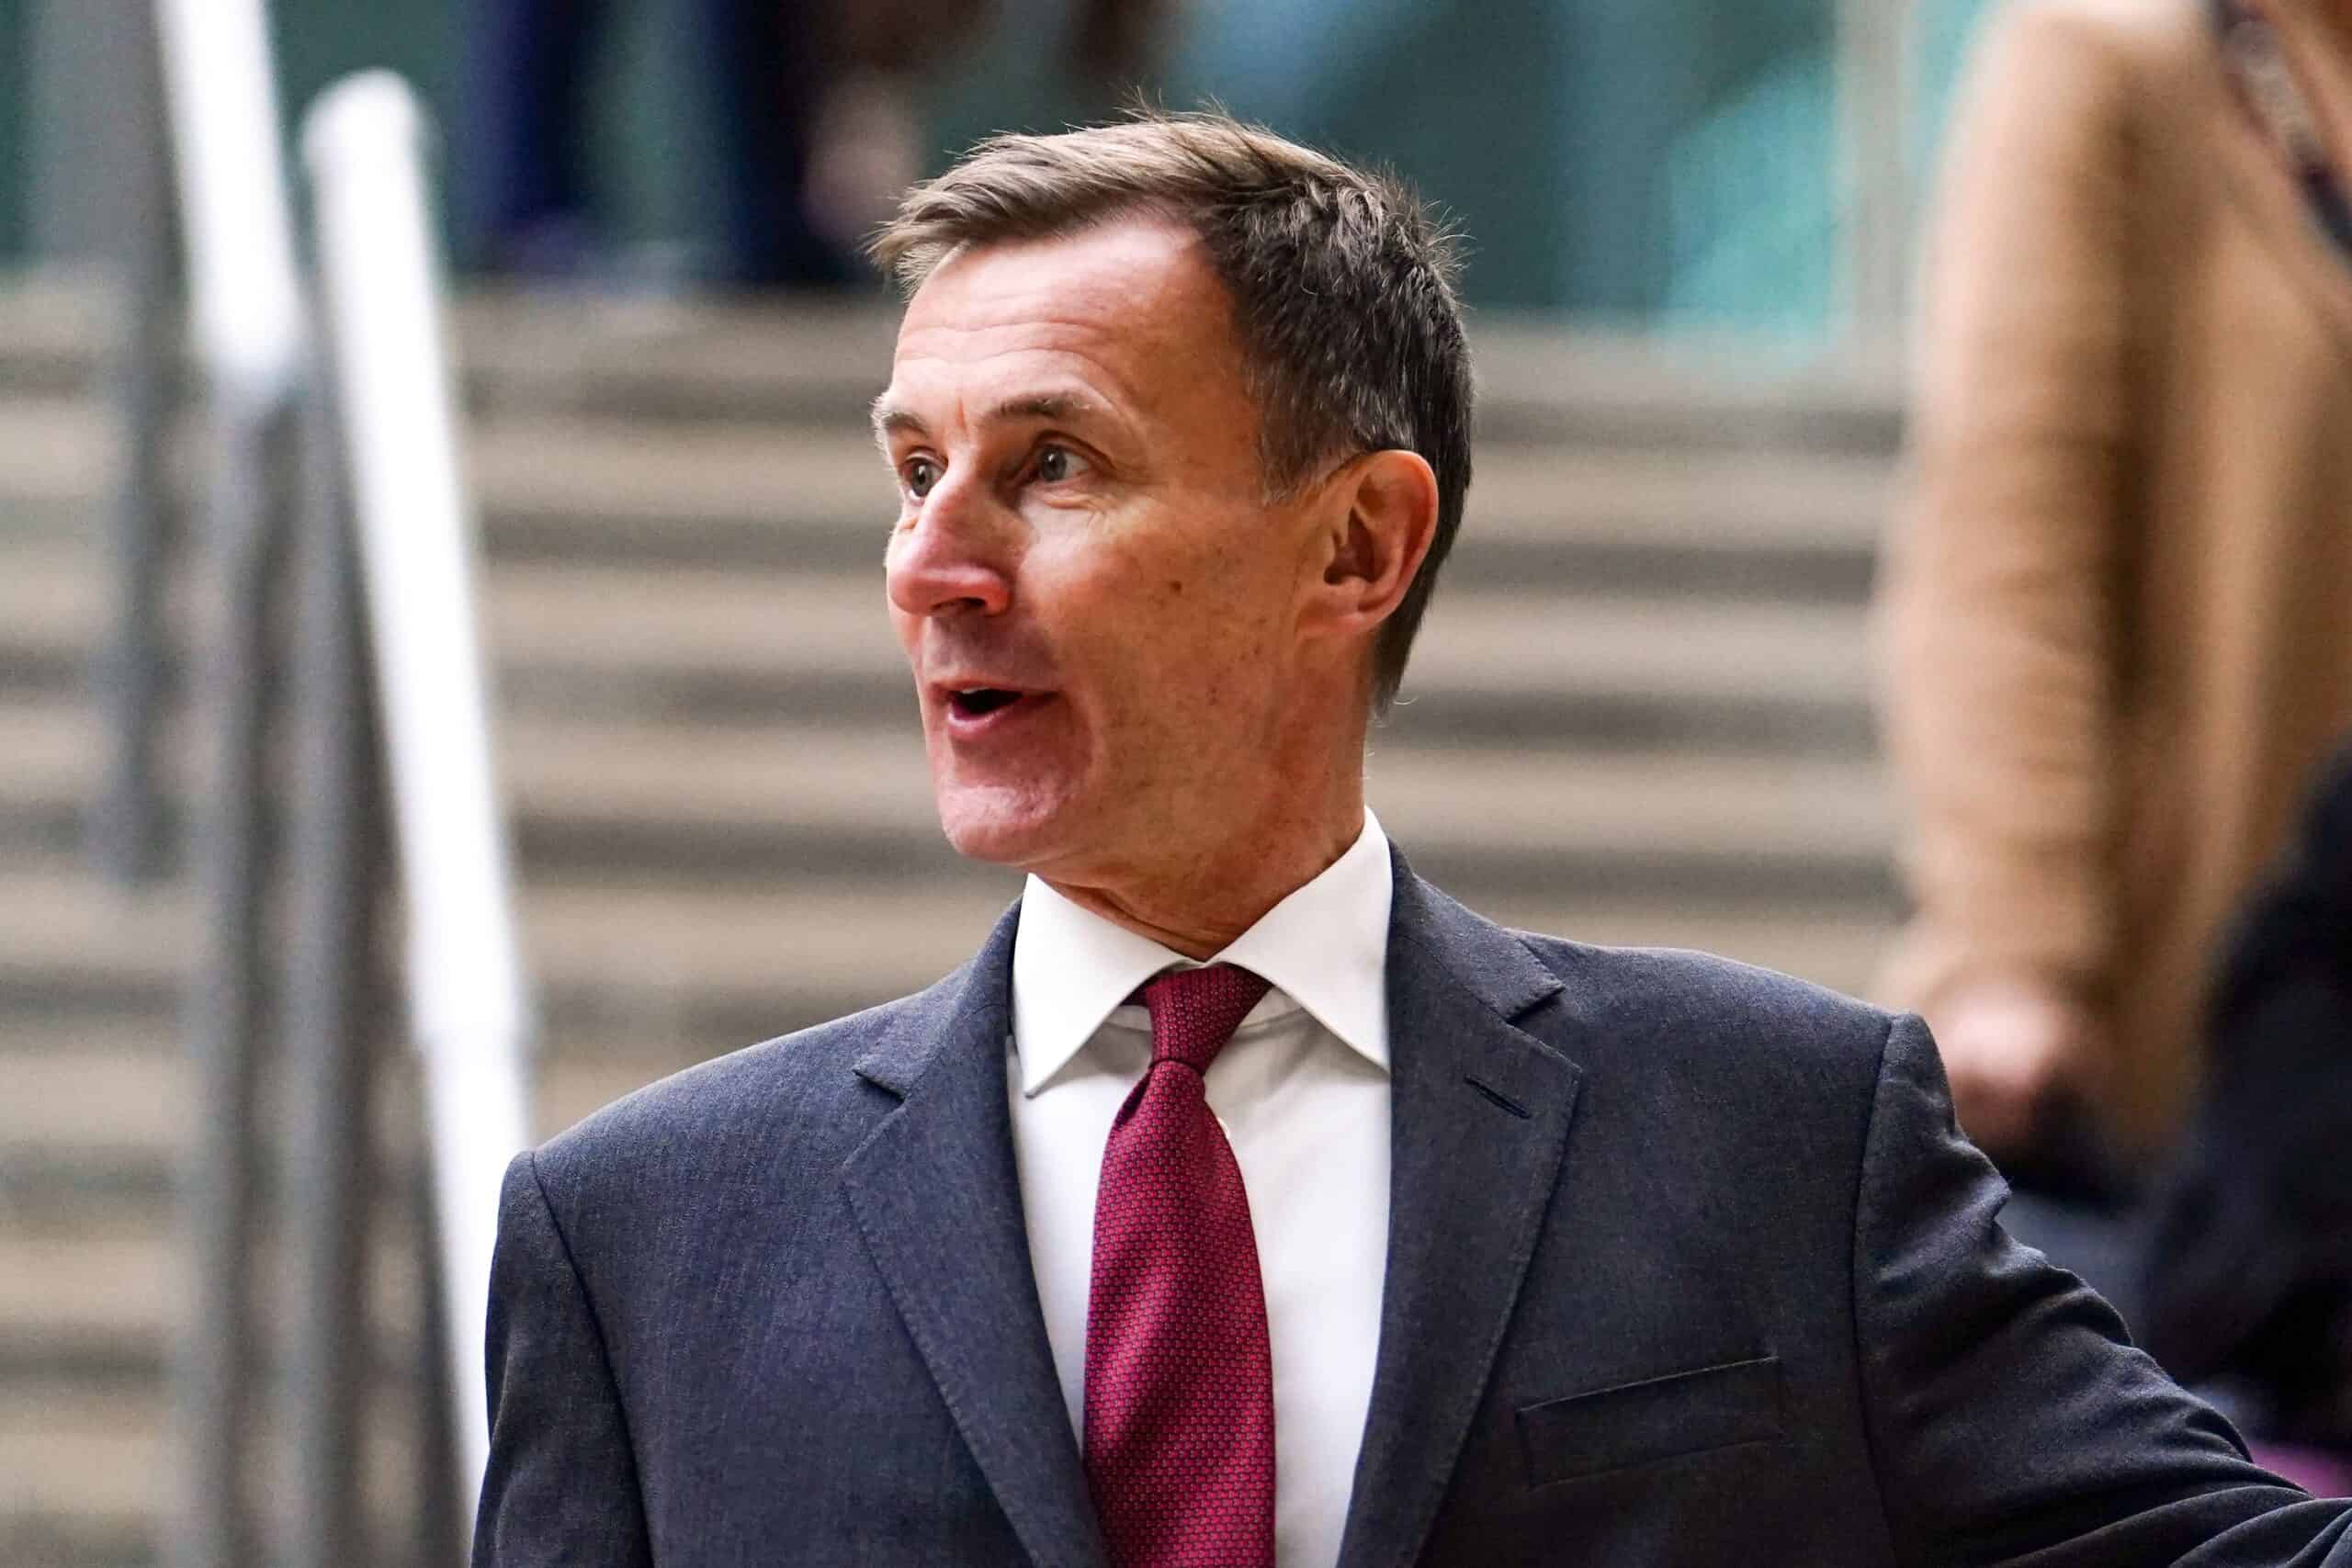 Jeremy Hunt tried to save ticket offices in his constituency before cuts were announced